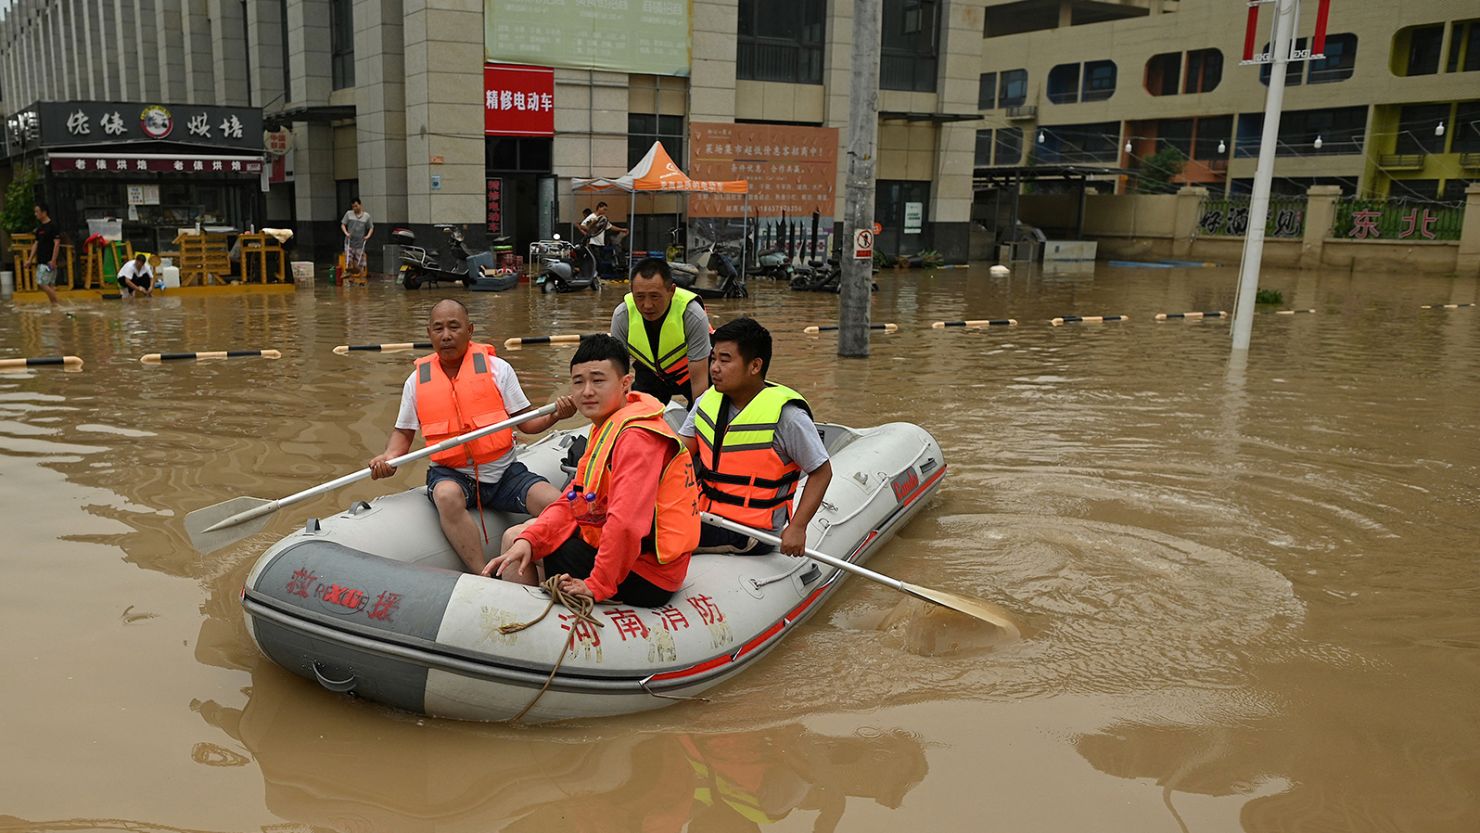 Rescue workers on a flooded street in Zhengzhou, China, on July 23, 2021, after heavy flooding devastated the city.